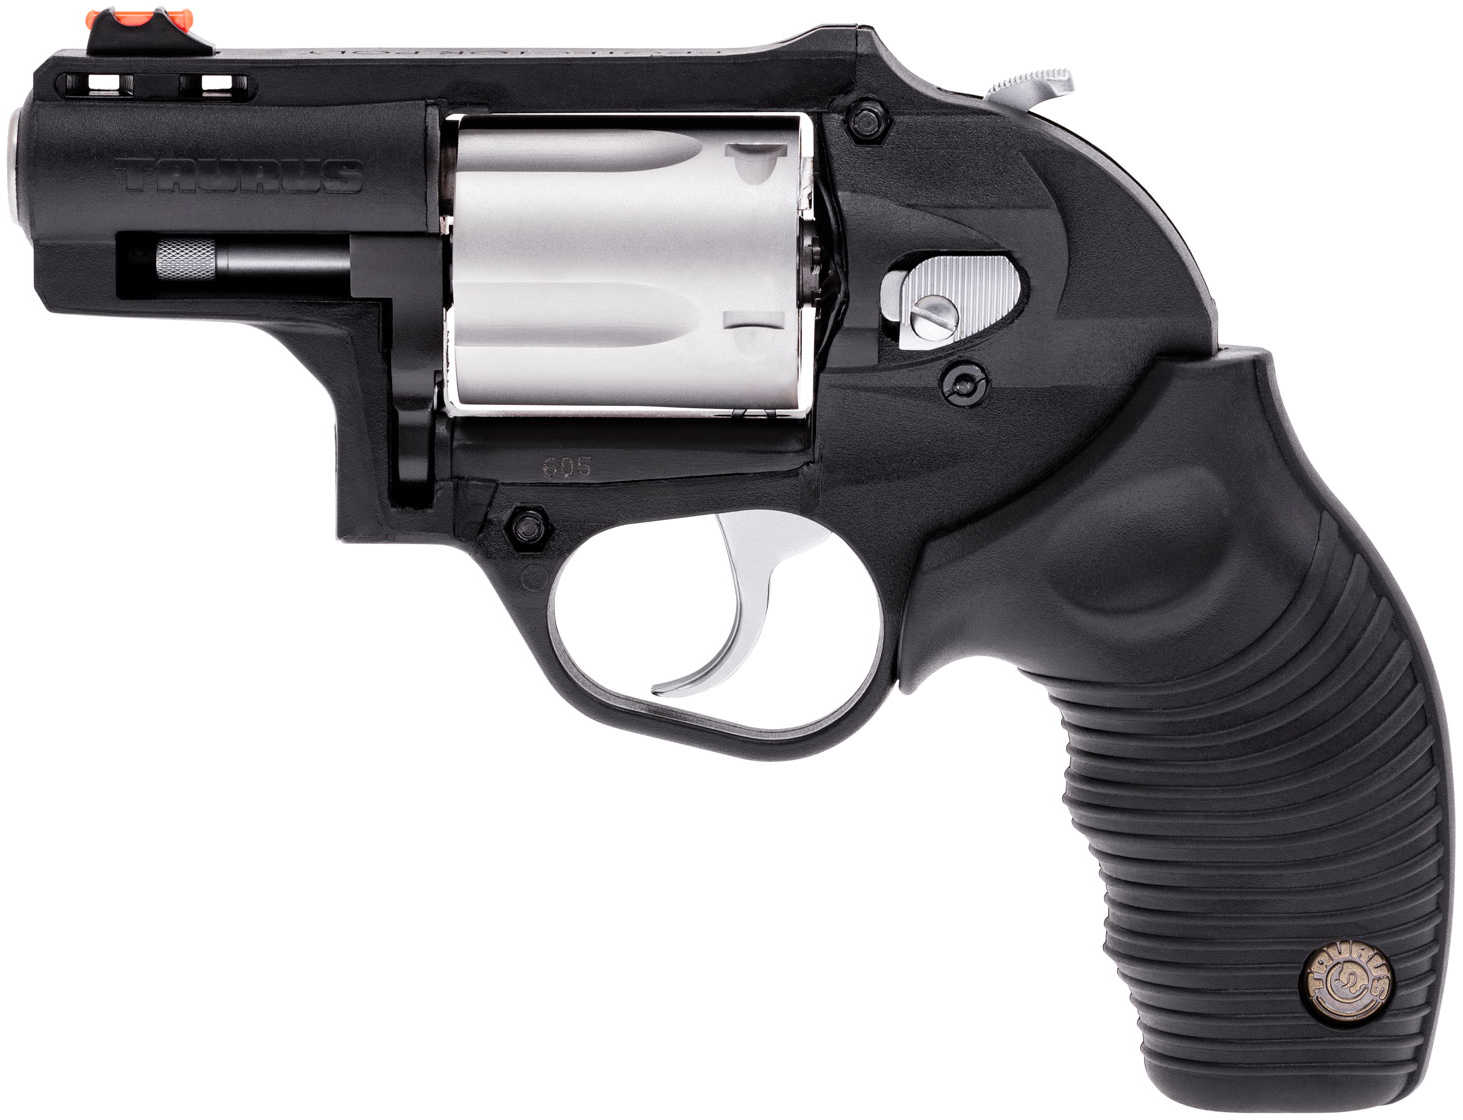 Taurus M605 Revolver 357 Magnum Protector Polymer Frame 2" Barrel 5 Shot Stainless Steel 2605029PLY